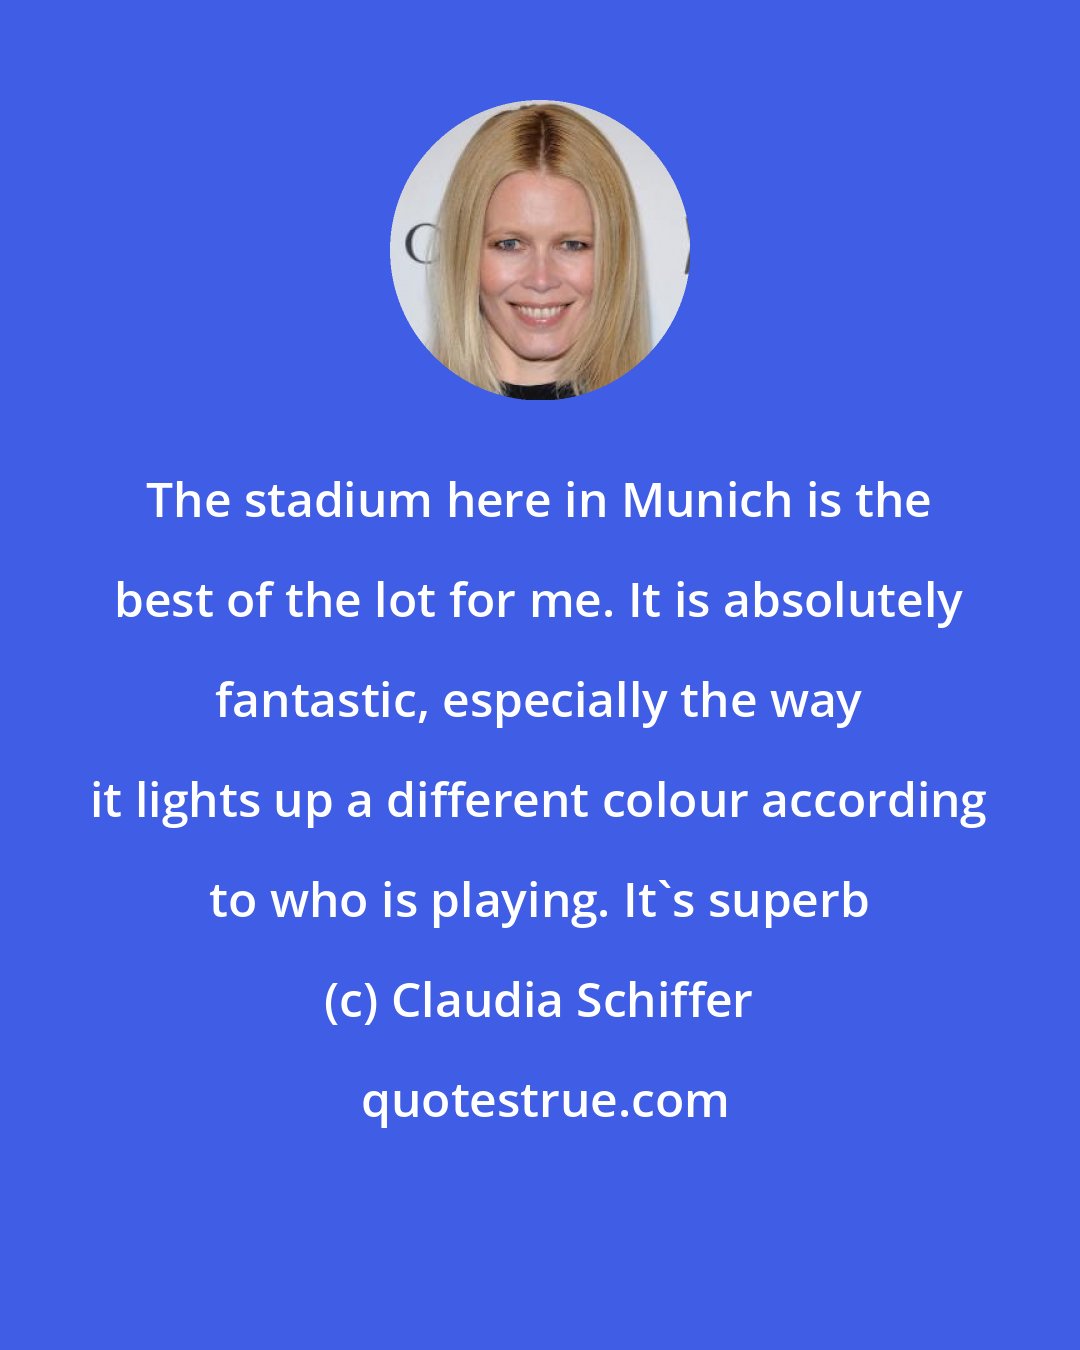 Claudia Schiffer: The stadium here in Munich is the best of the lot for me. It is absolutely fantastic, especially the way it lights up a different colour according to who is playing. It's superb